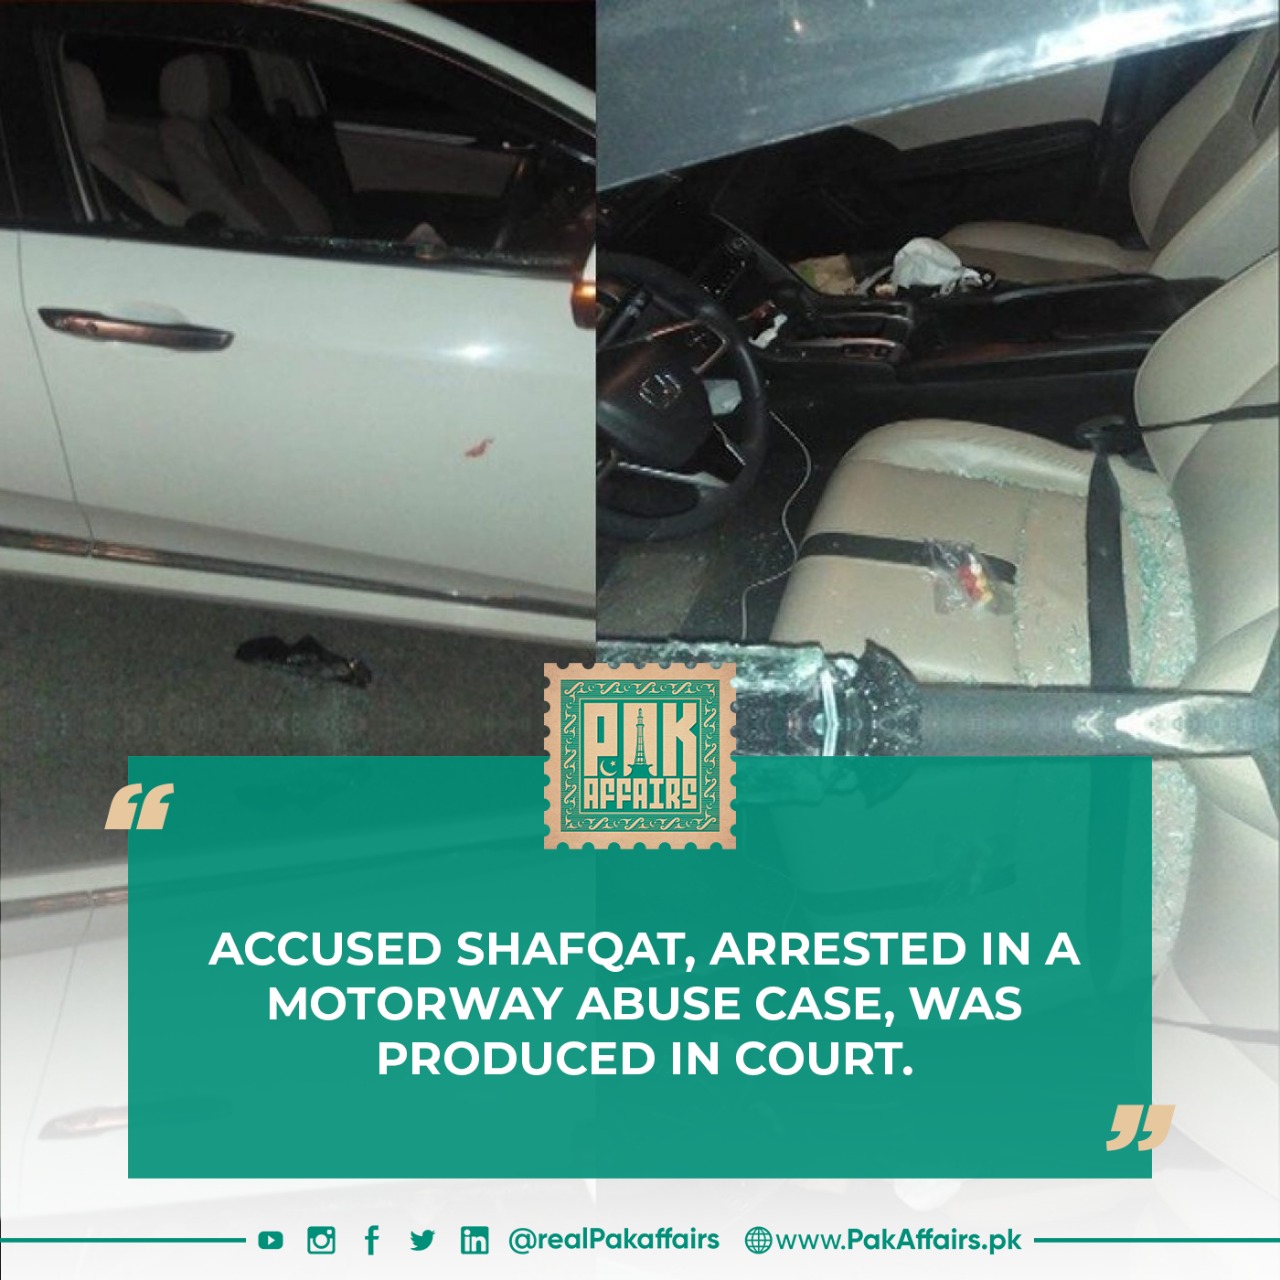 Accused Shafqat, arrested in a motorway abuse case, was produced in court.